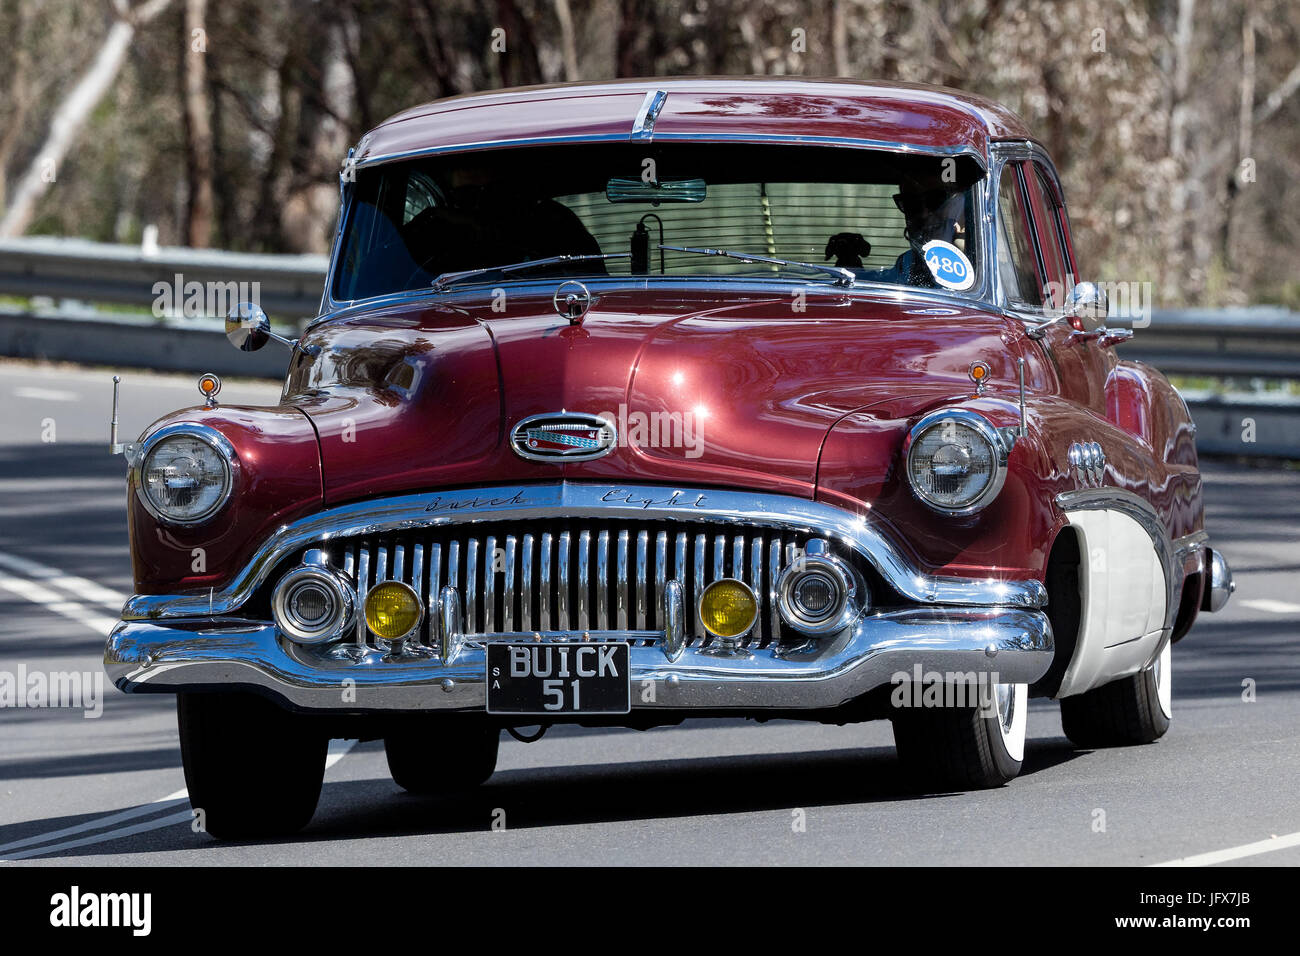 Vintage 1951 Buick Super Sedan driving on country roads near the town of Birdwood, South Australia. Stock Photo